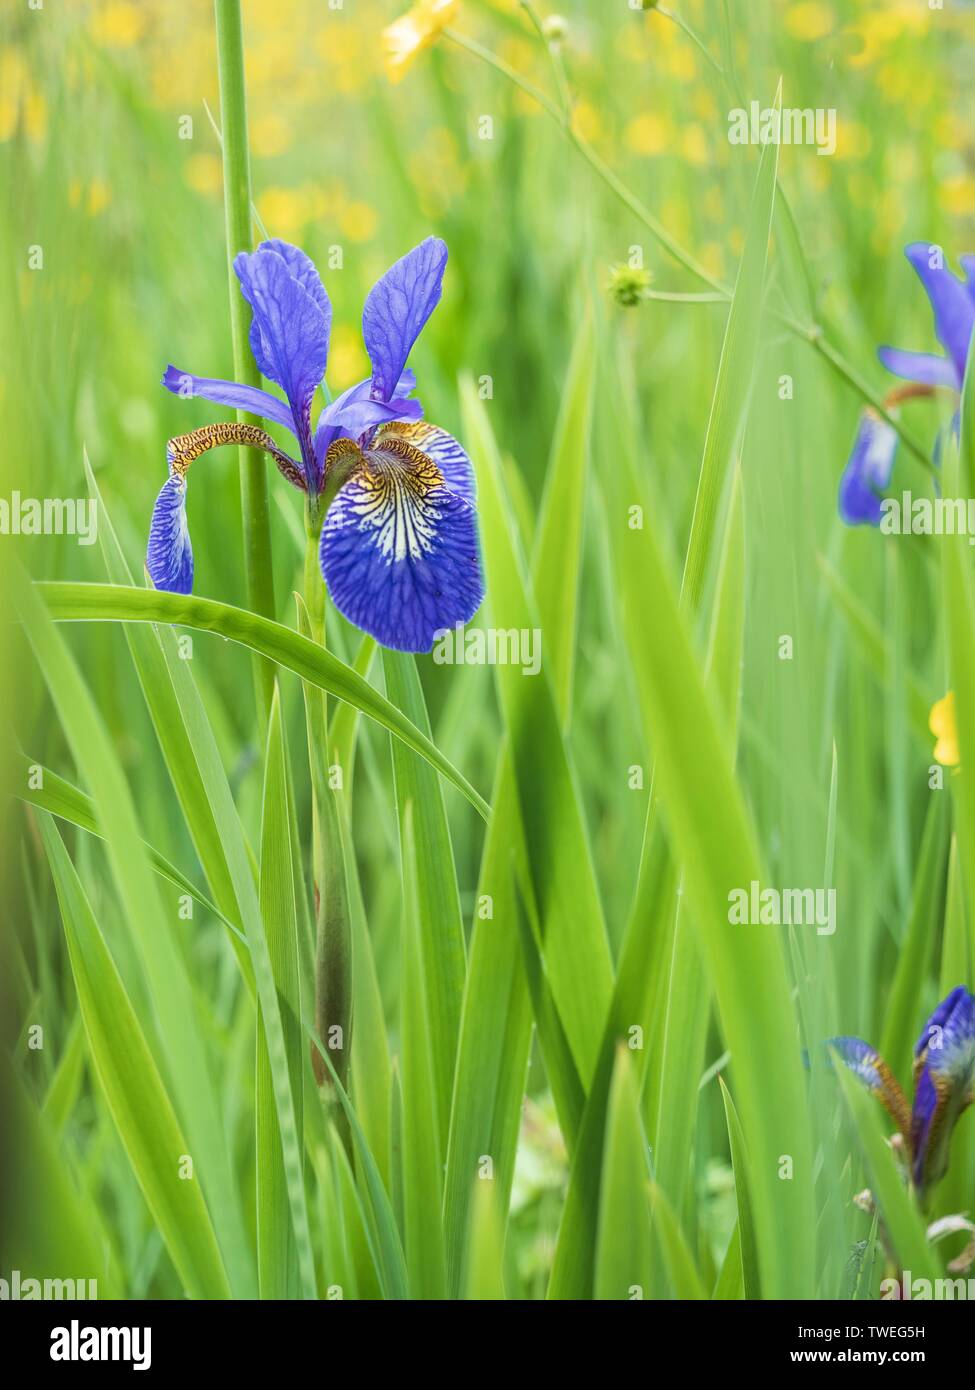 A close up image of a wild blue iris in the grass of a wildflower meadow Stock Photo